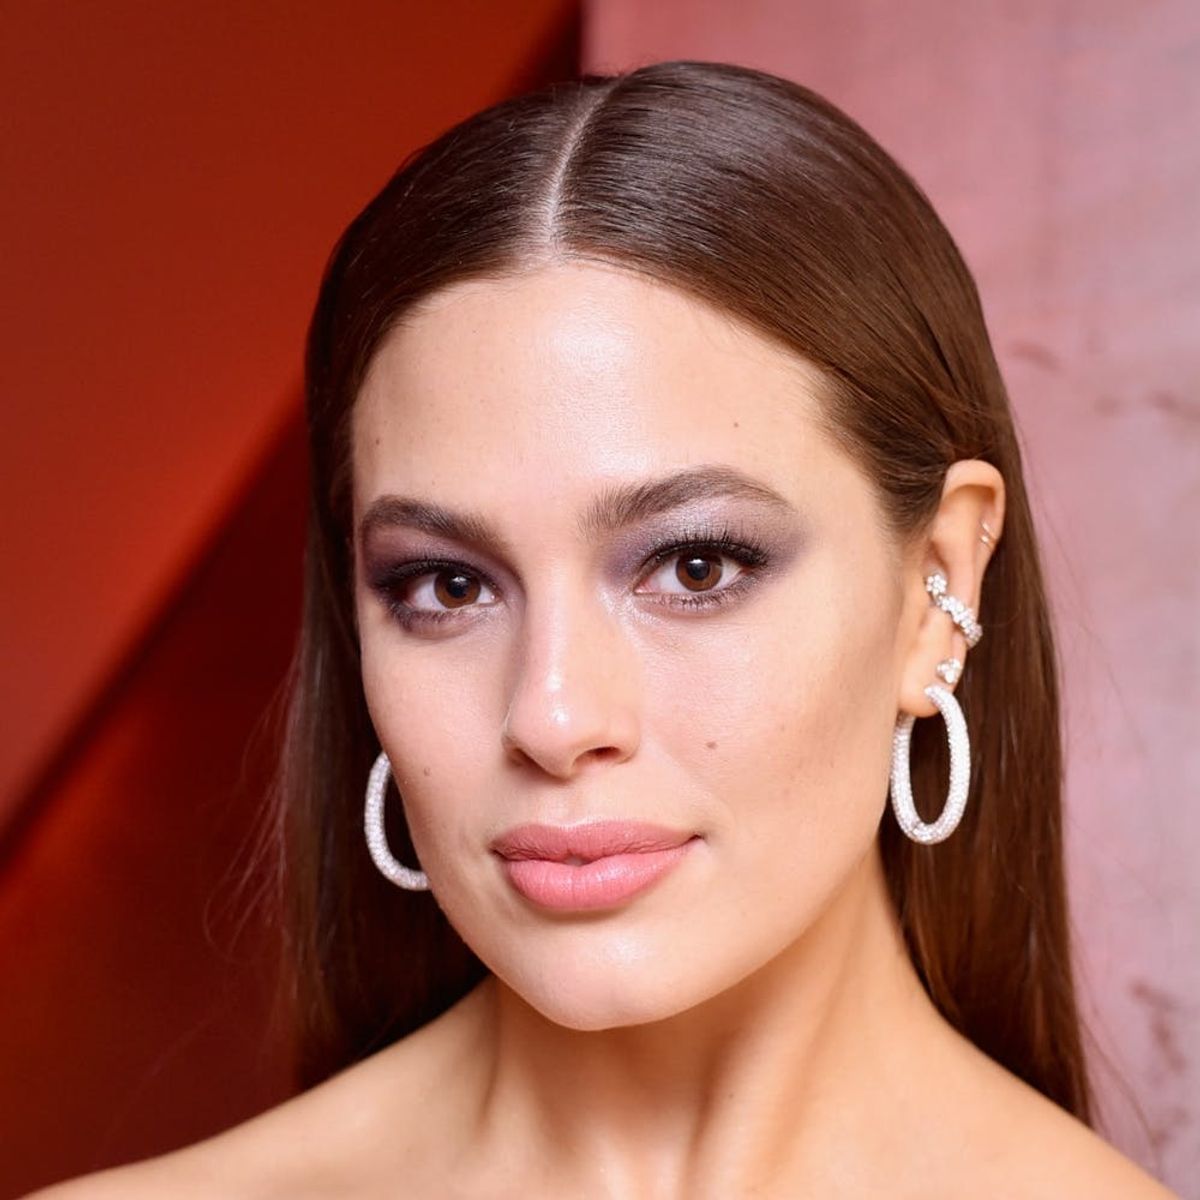 Ashley Graham Just Got the Most Daring Tattoo… on the Side of Her Neck!